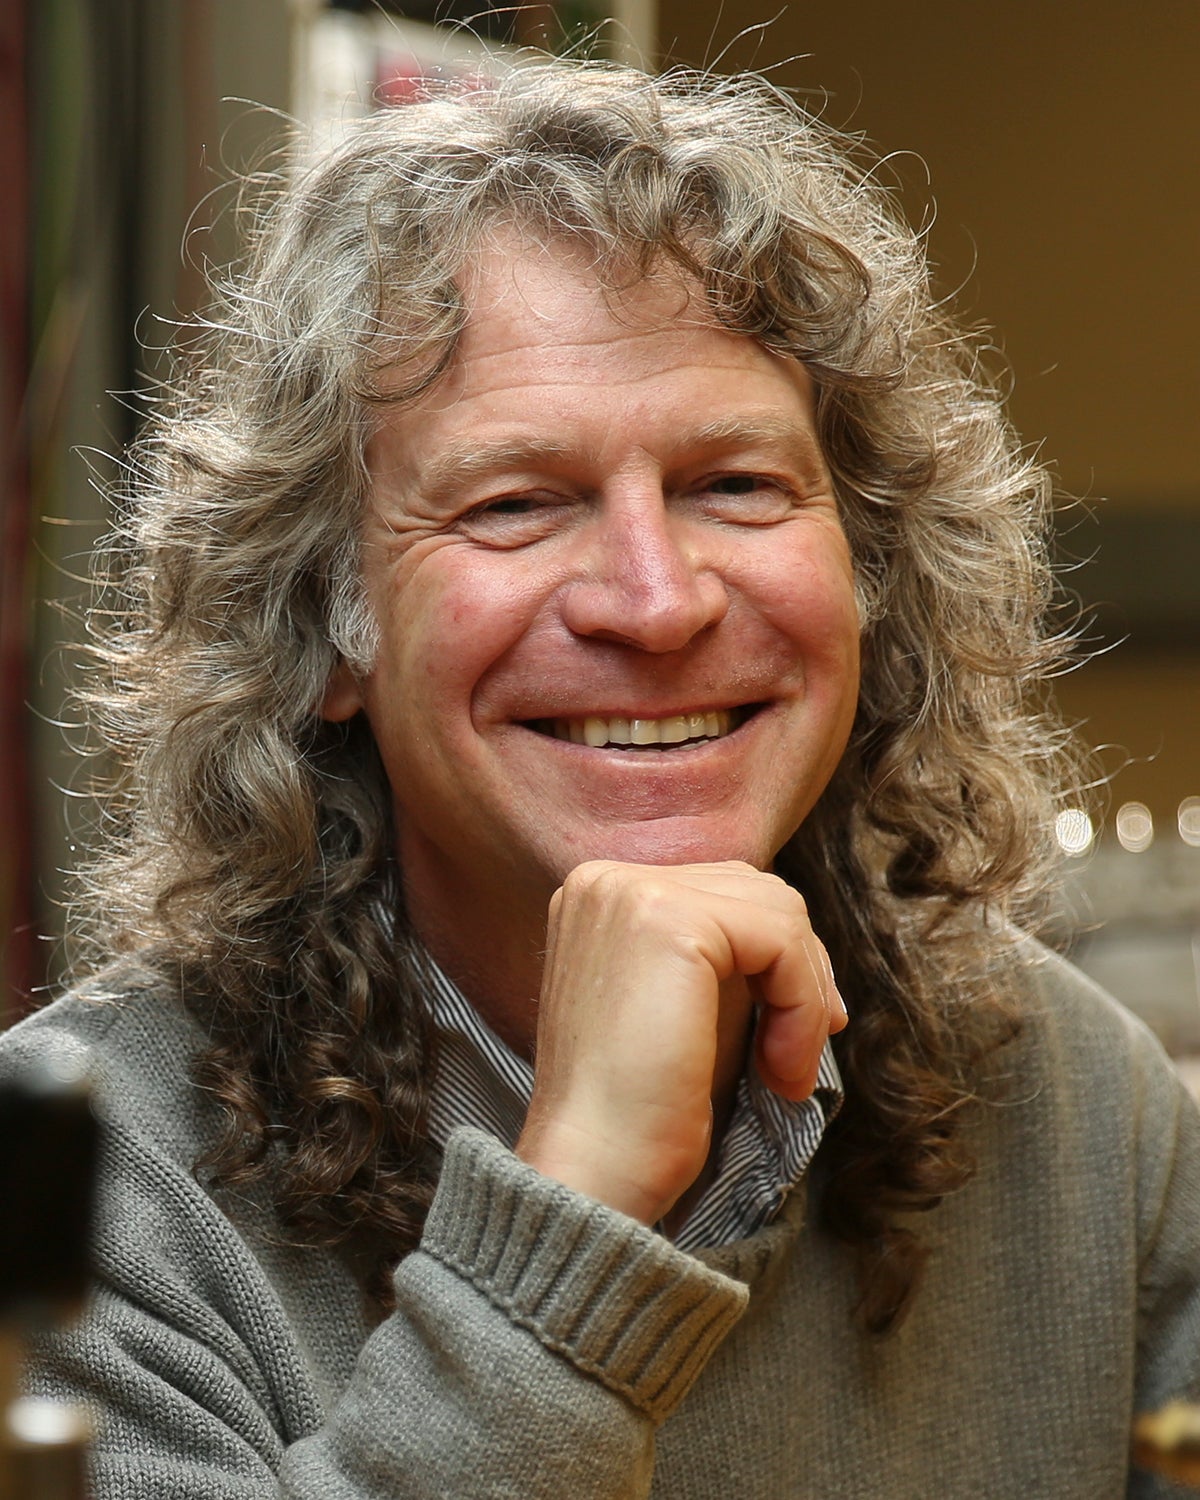 Physicist Richard Taylor with chin on thumb and smile